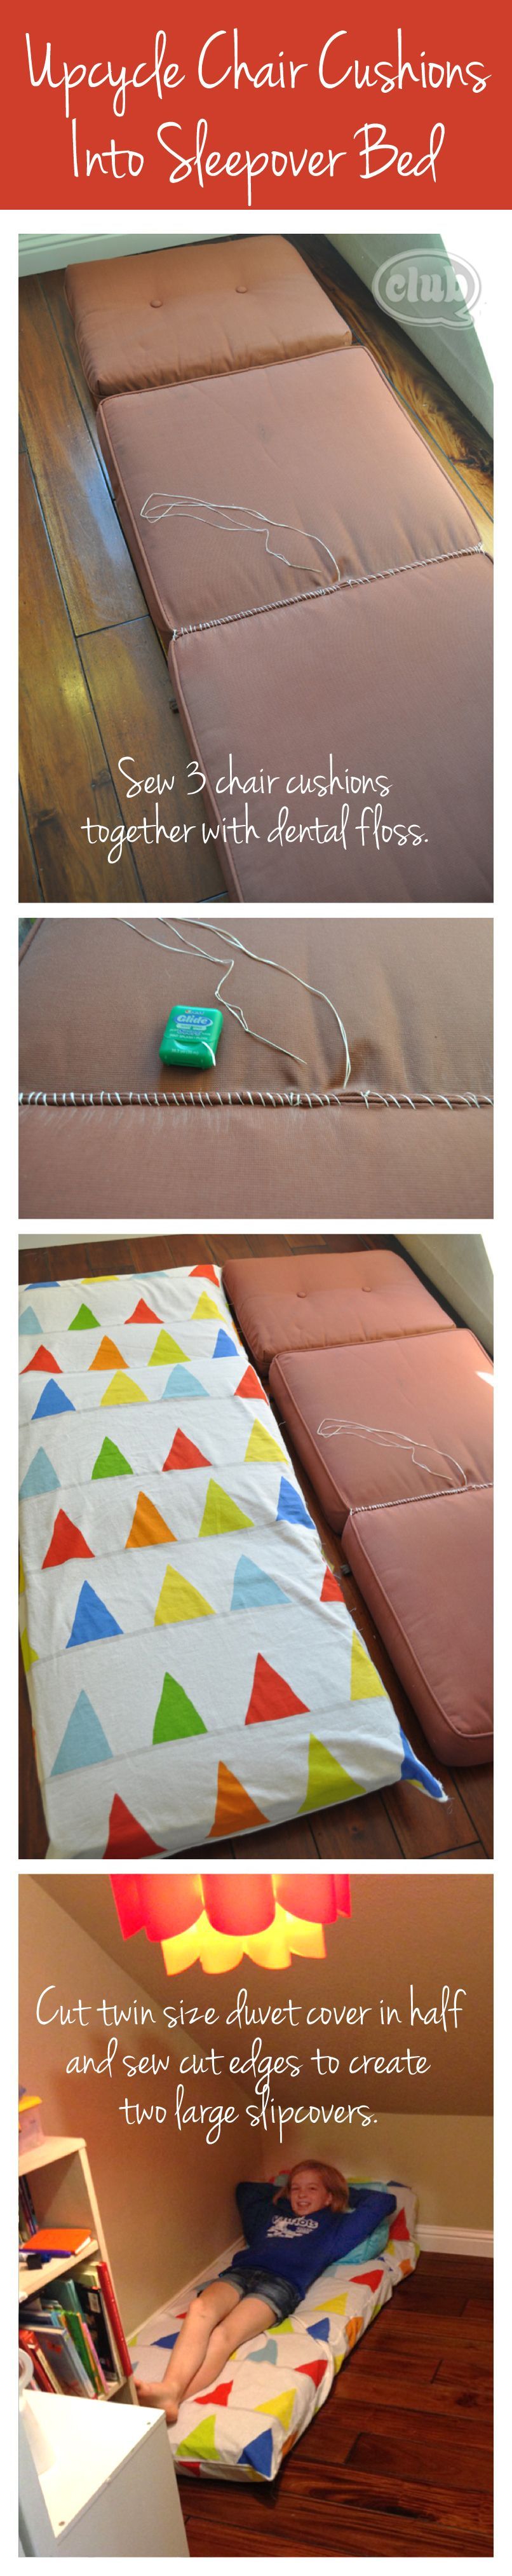 Upcycle outdoor chair cushions into sleeping pads DIY